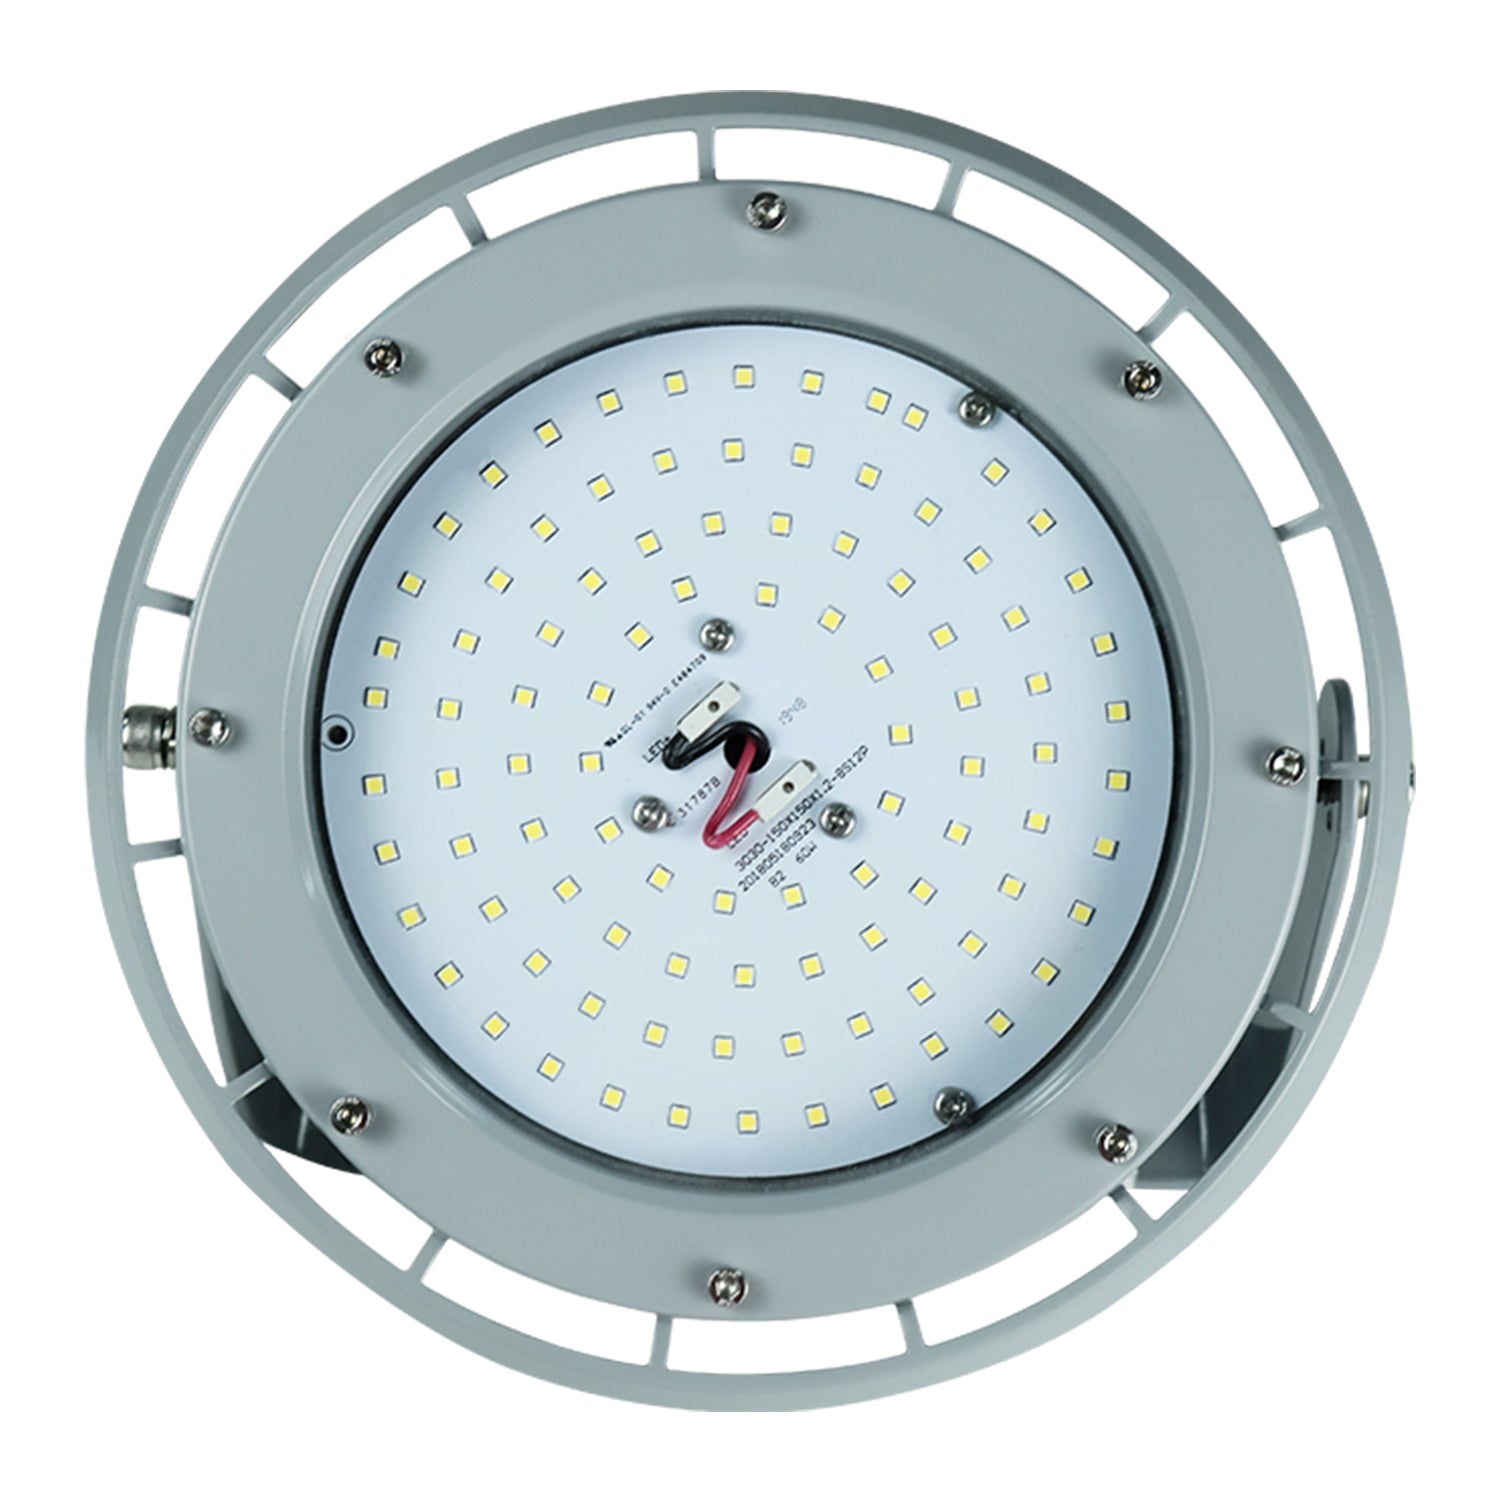 300 Watt LED Explosion Proof Round High Bay Light, B Series, Dimmable, 5000K, 42000LM, AC100-277V, IP66, Ideal for Oil & Gas Refineries, Drilling Rigs, Petrochemical Facilities